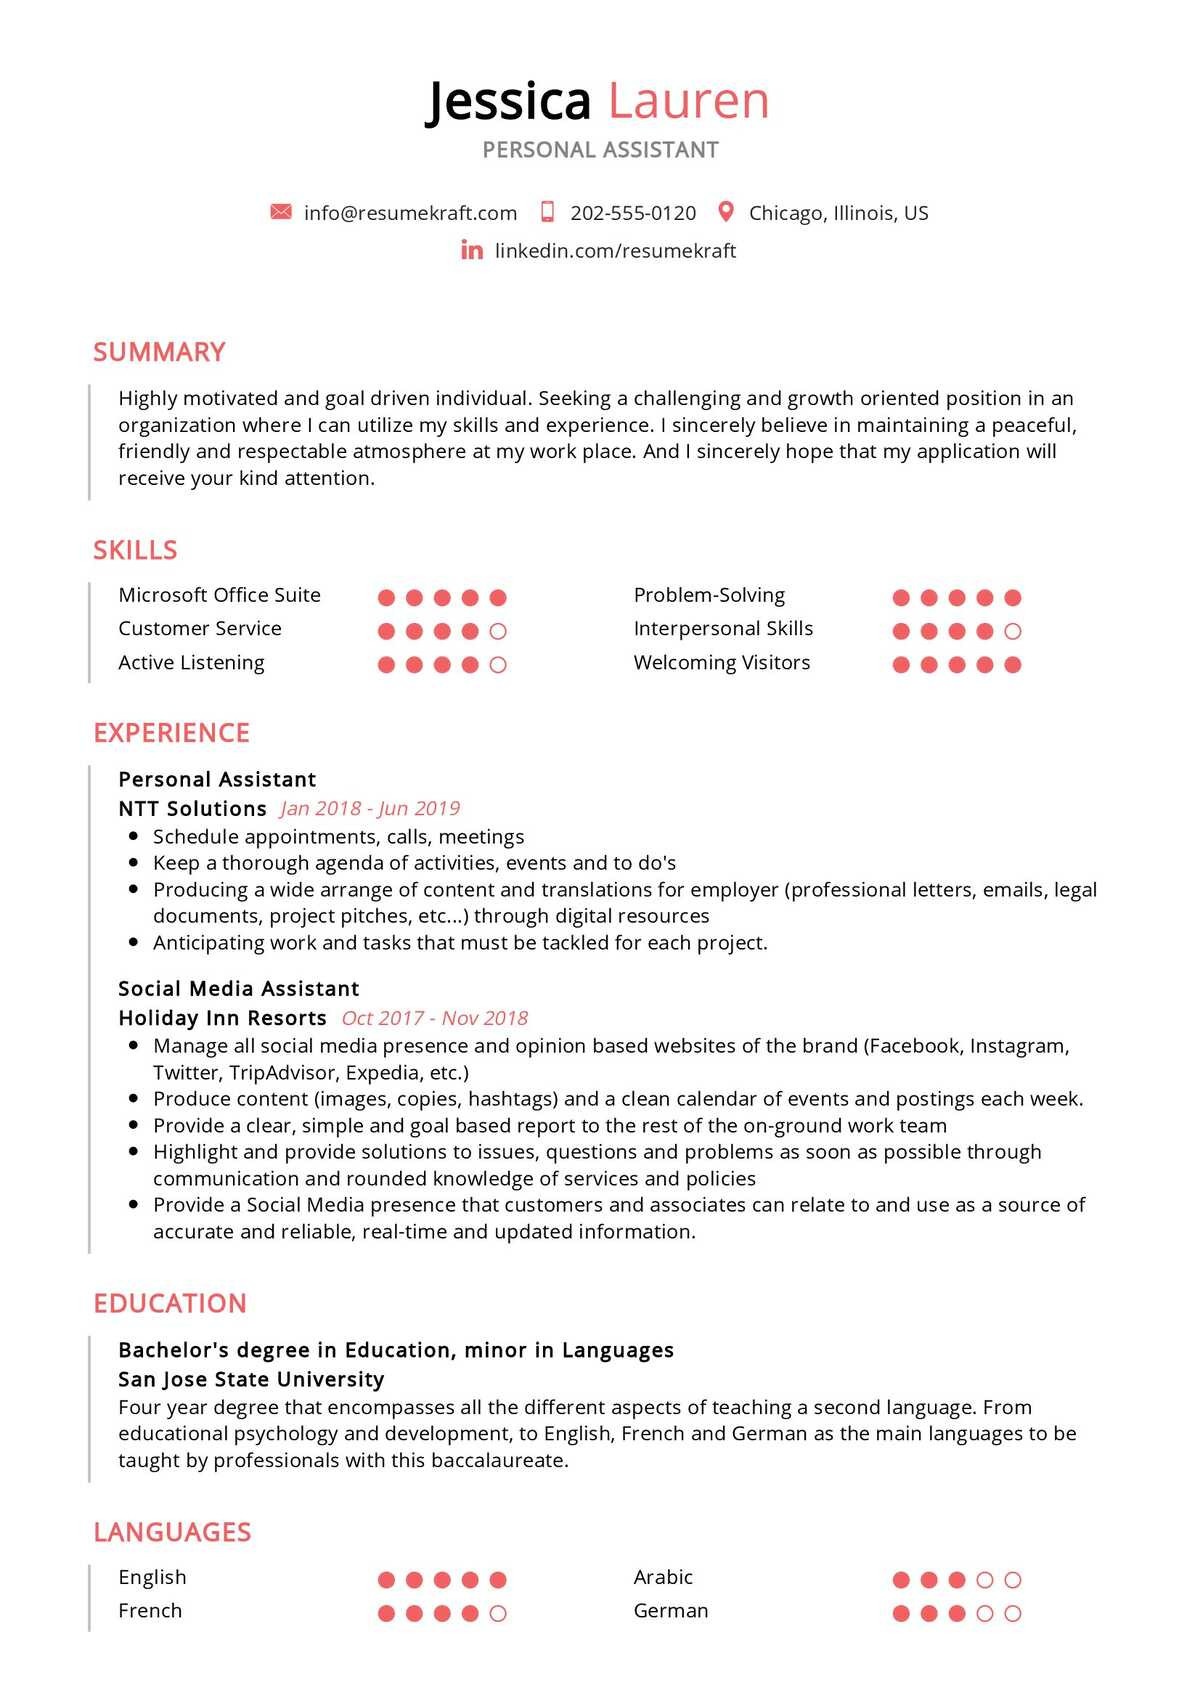 We Will Keep Your Resume On File Sample Letter Personal assistant Resume Sample Resumekraft